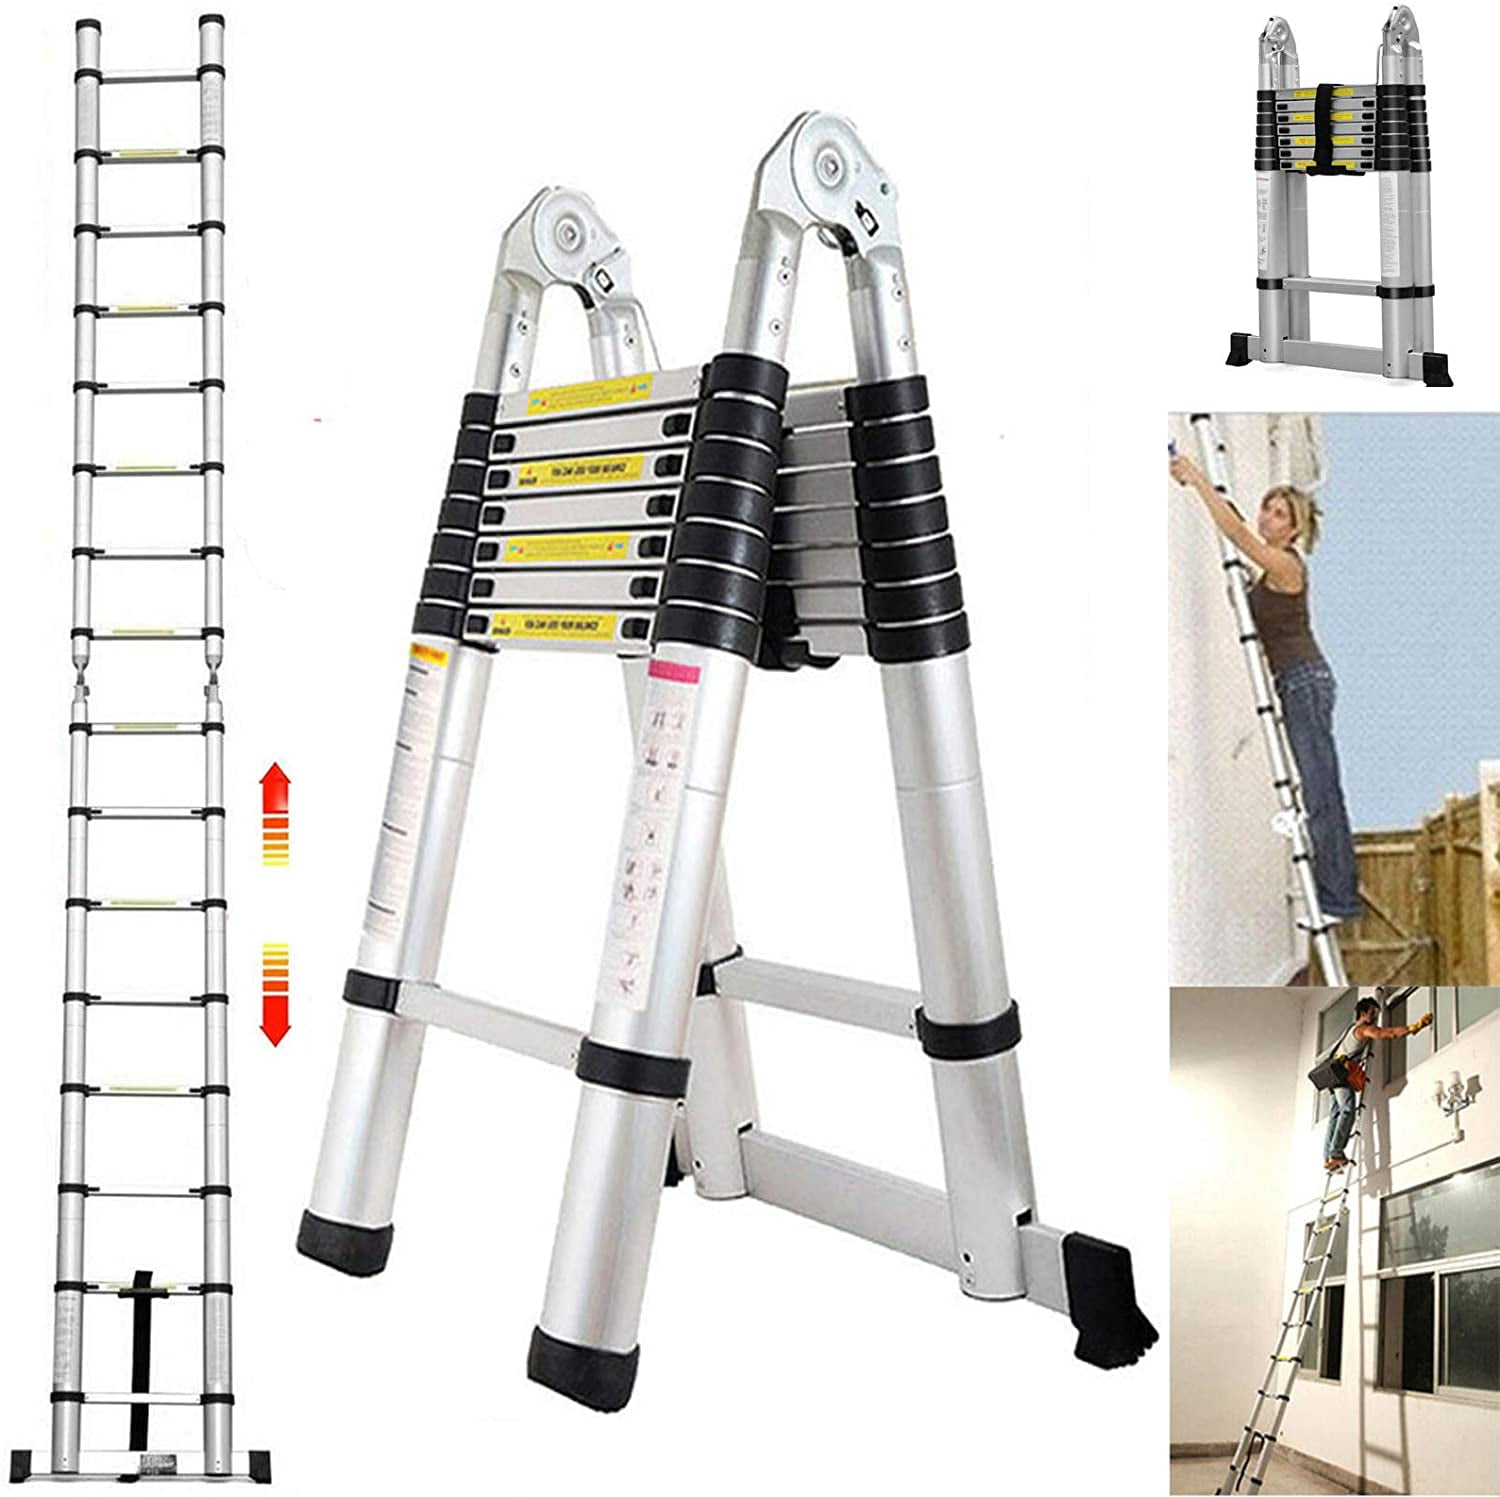 Telescoping A Frame Ladder Extension Ladders 12.5 Feet 330 Pounds Capacity